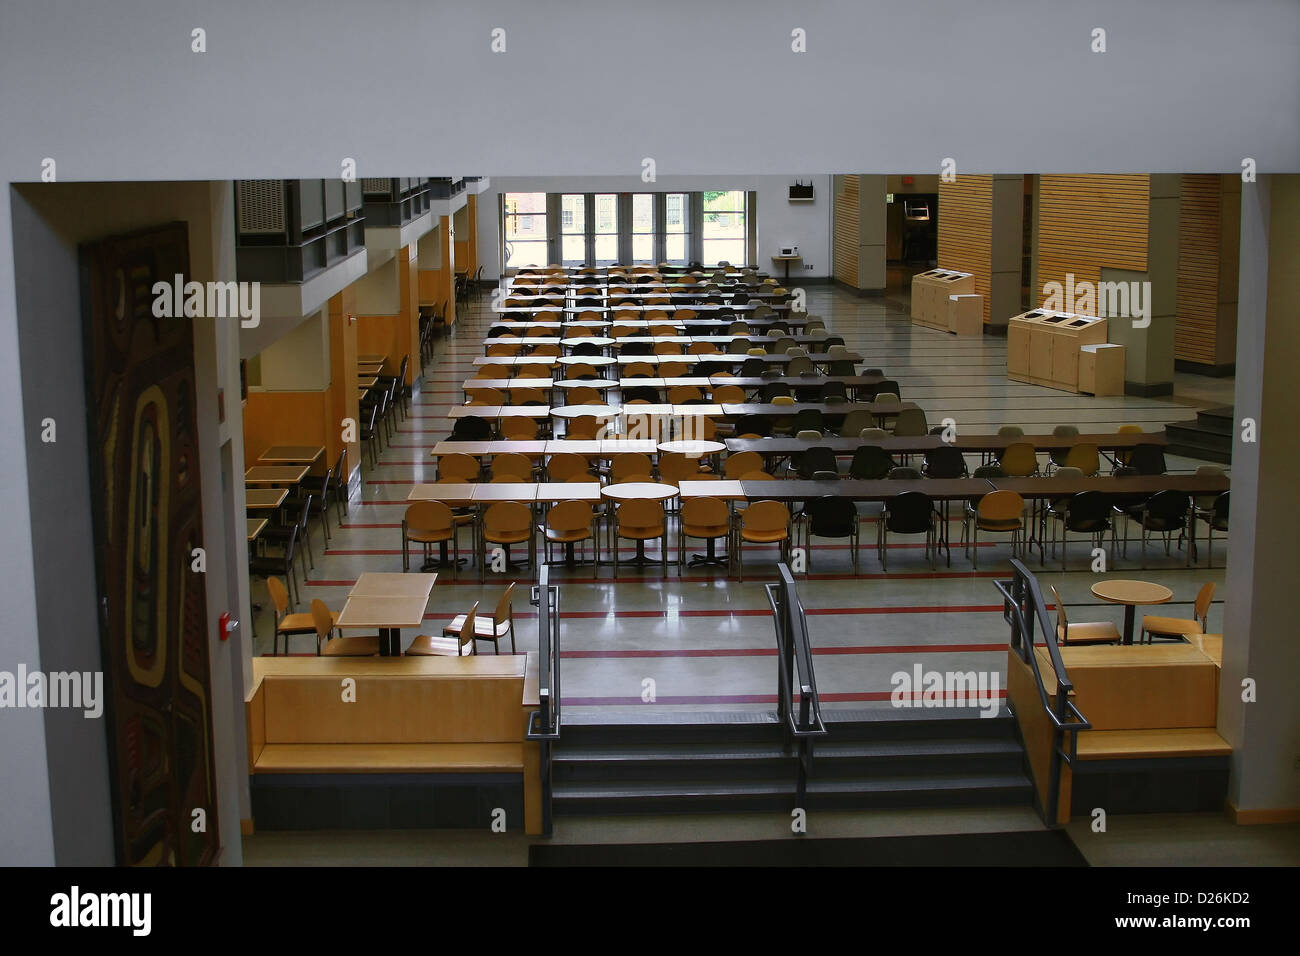 Large vacant dining hall Stock Photo